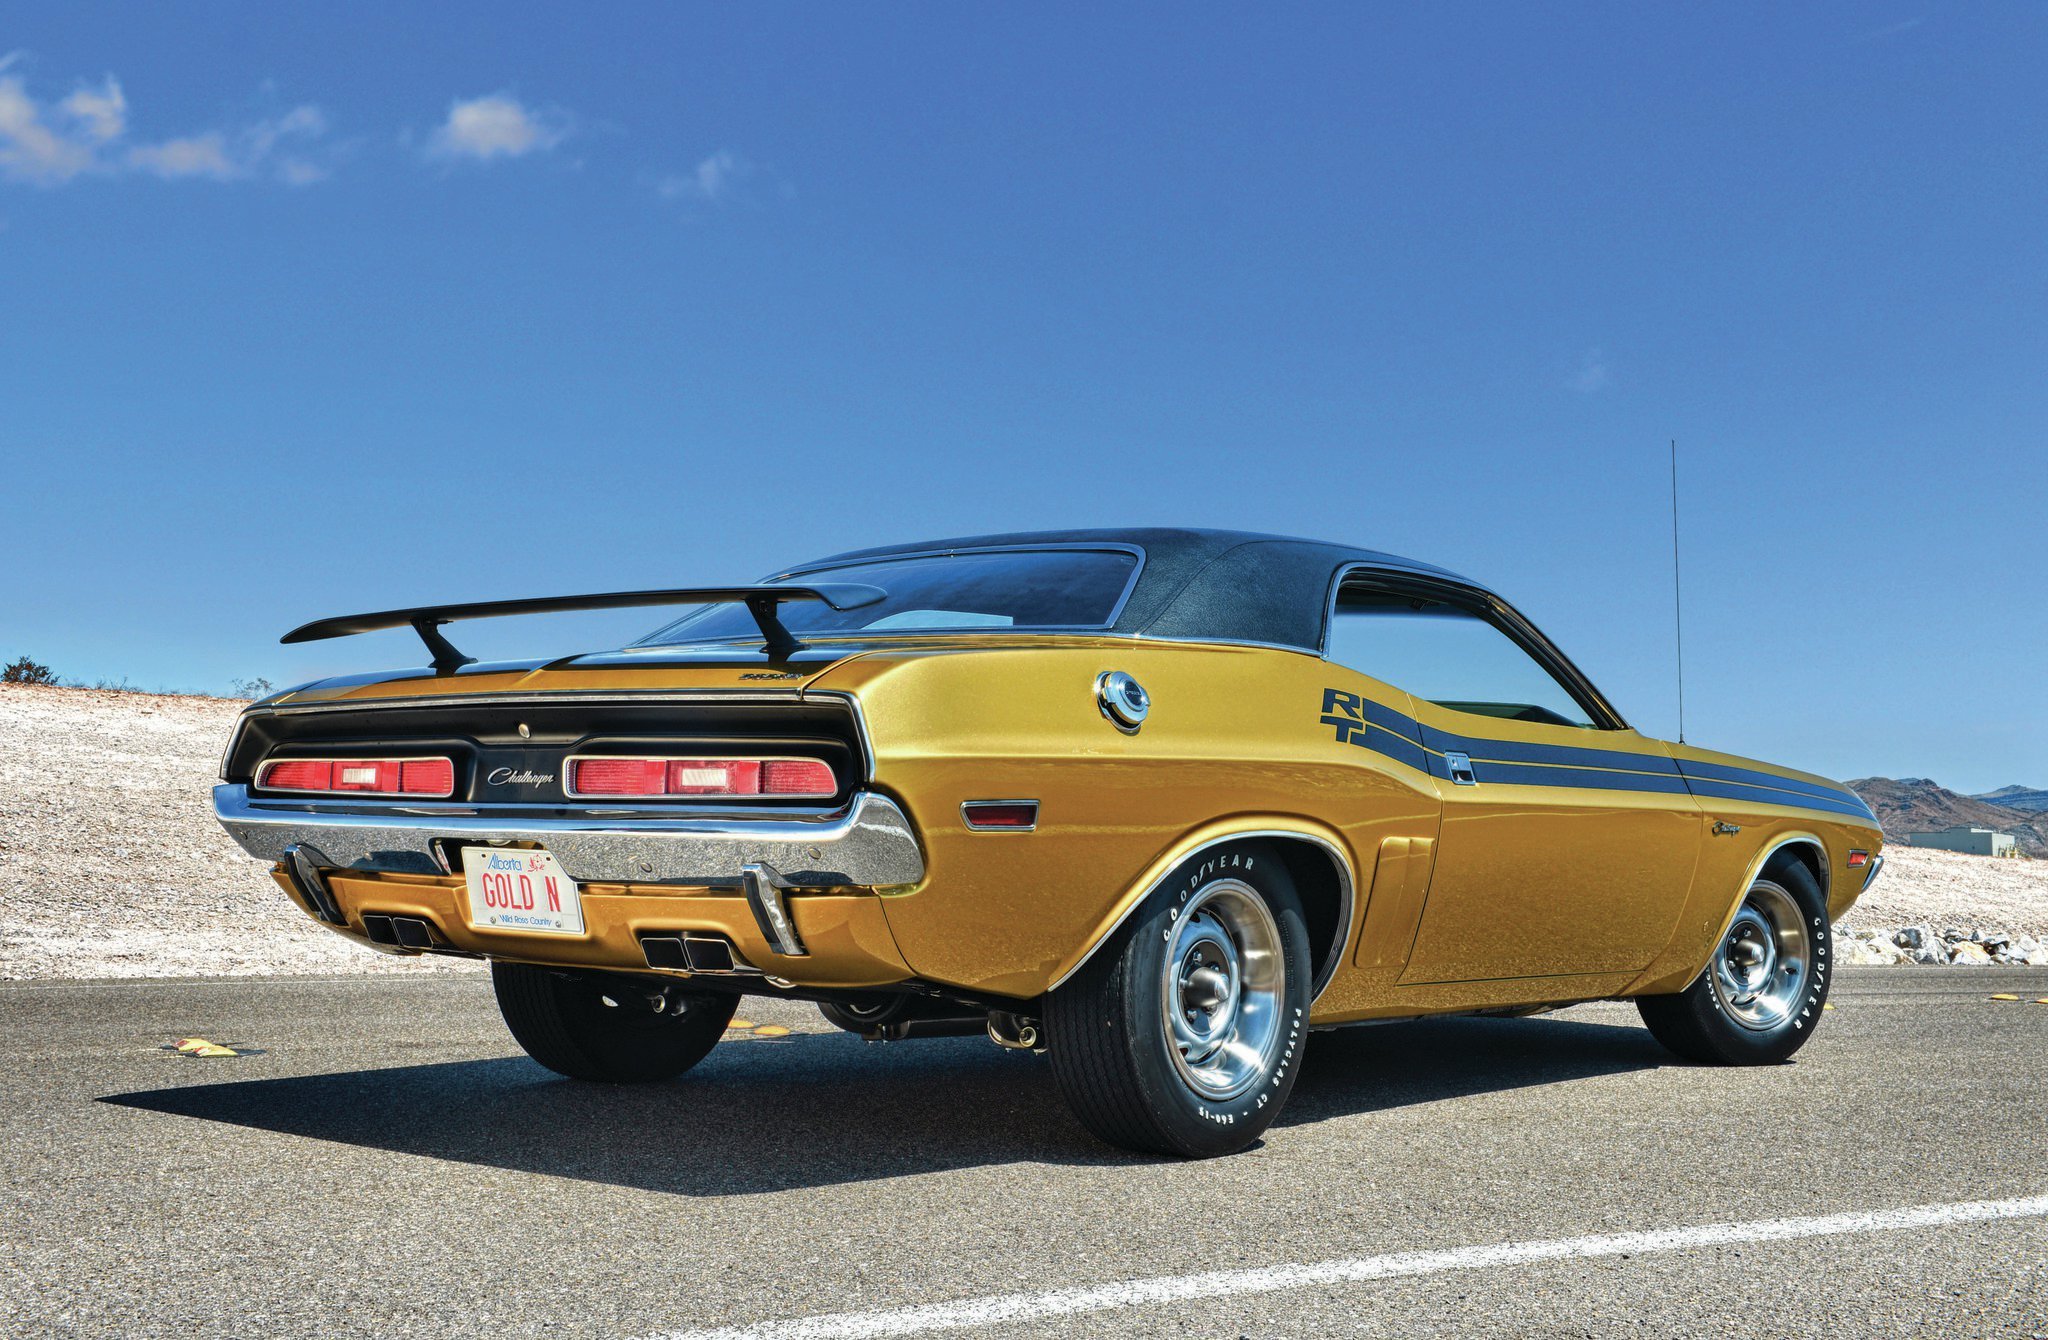 1971, Challenger, Classic, Dodge, Muscle, Cars Wallpaper